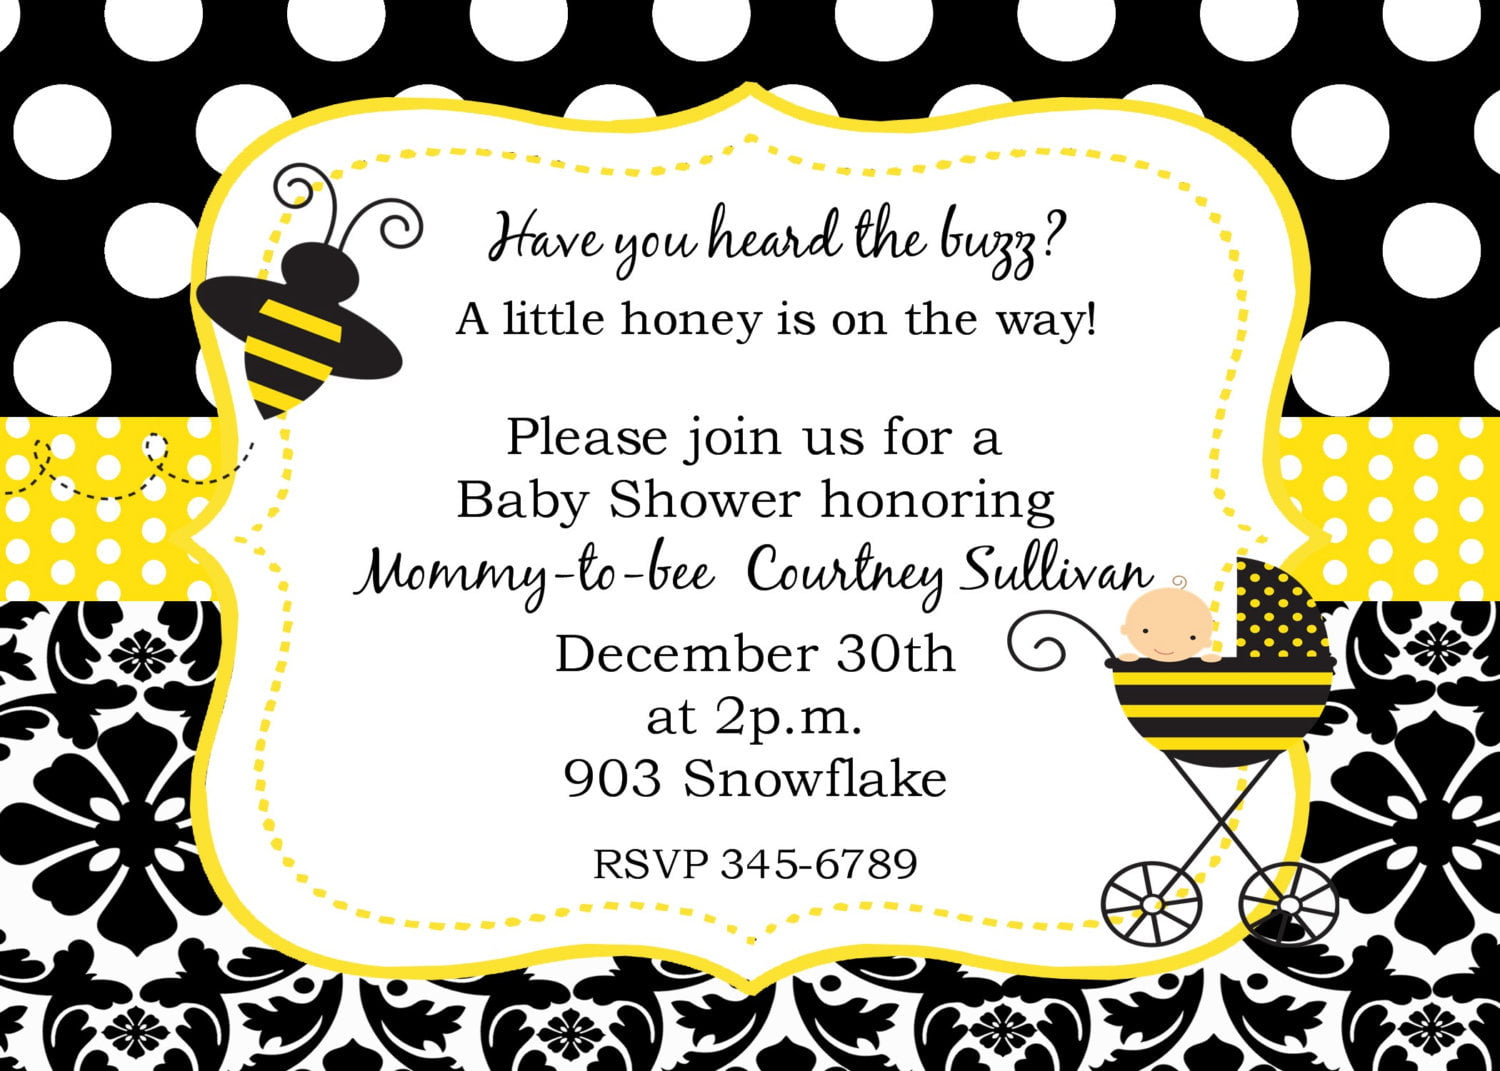 Bumble Bee Baby Shower Ideas FREE Printable Baby Shower Invitations 